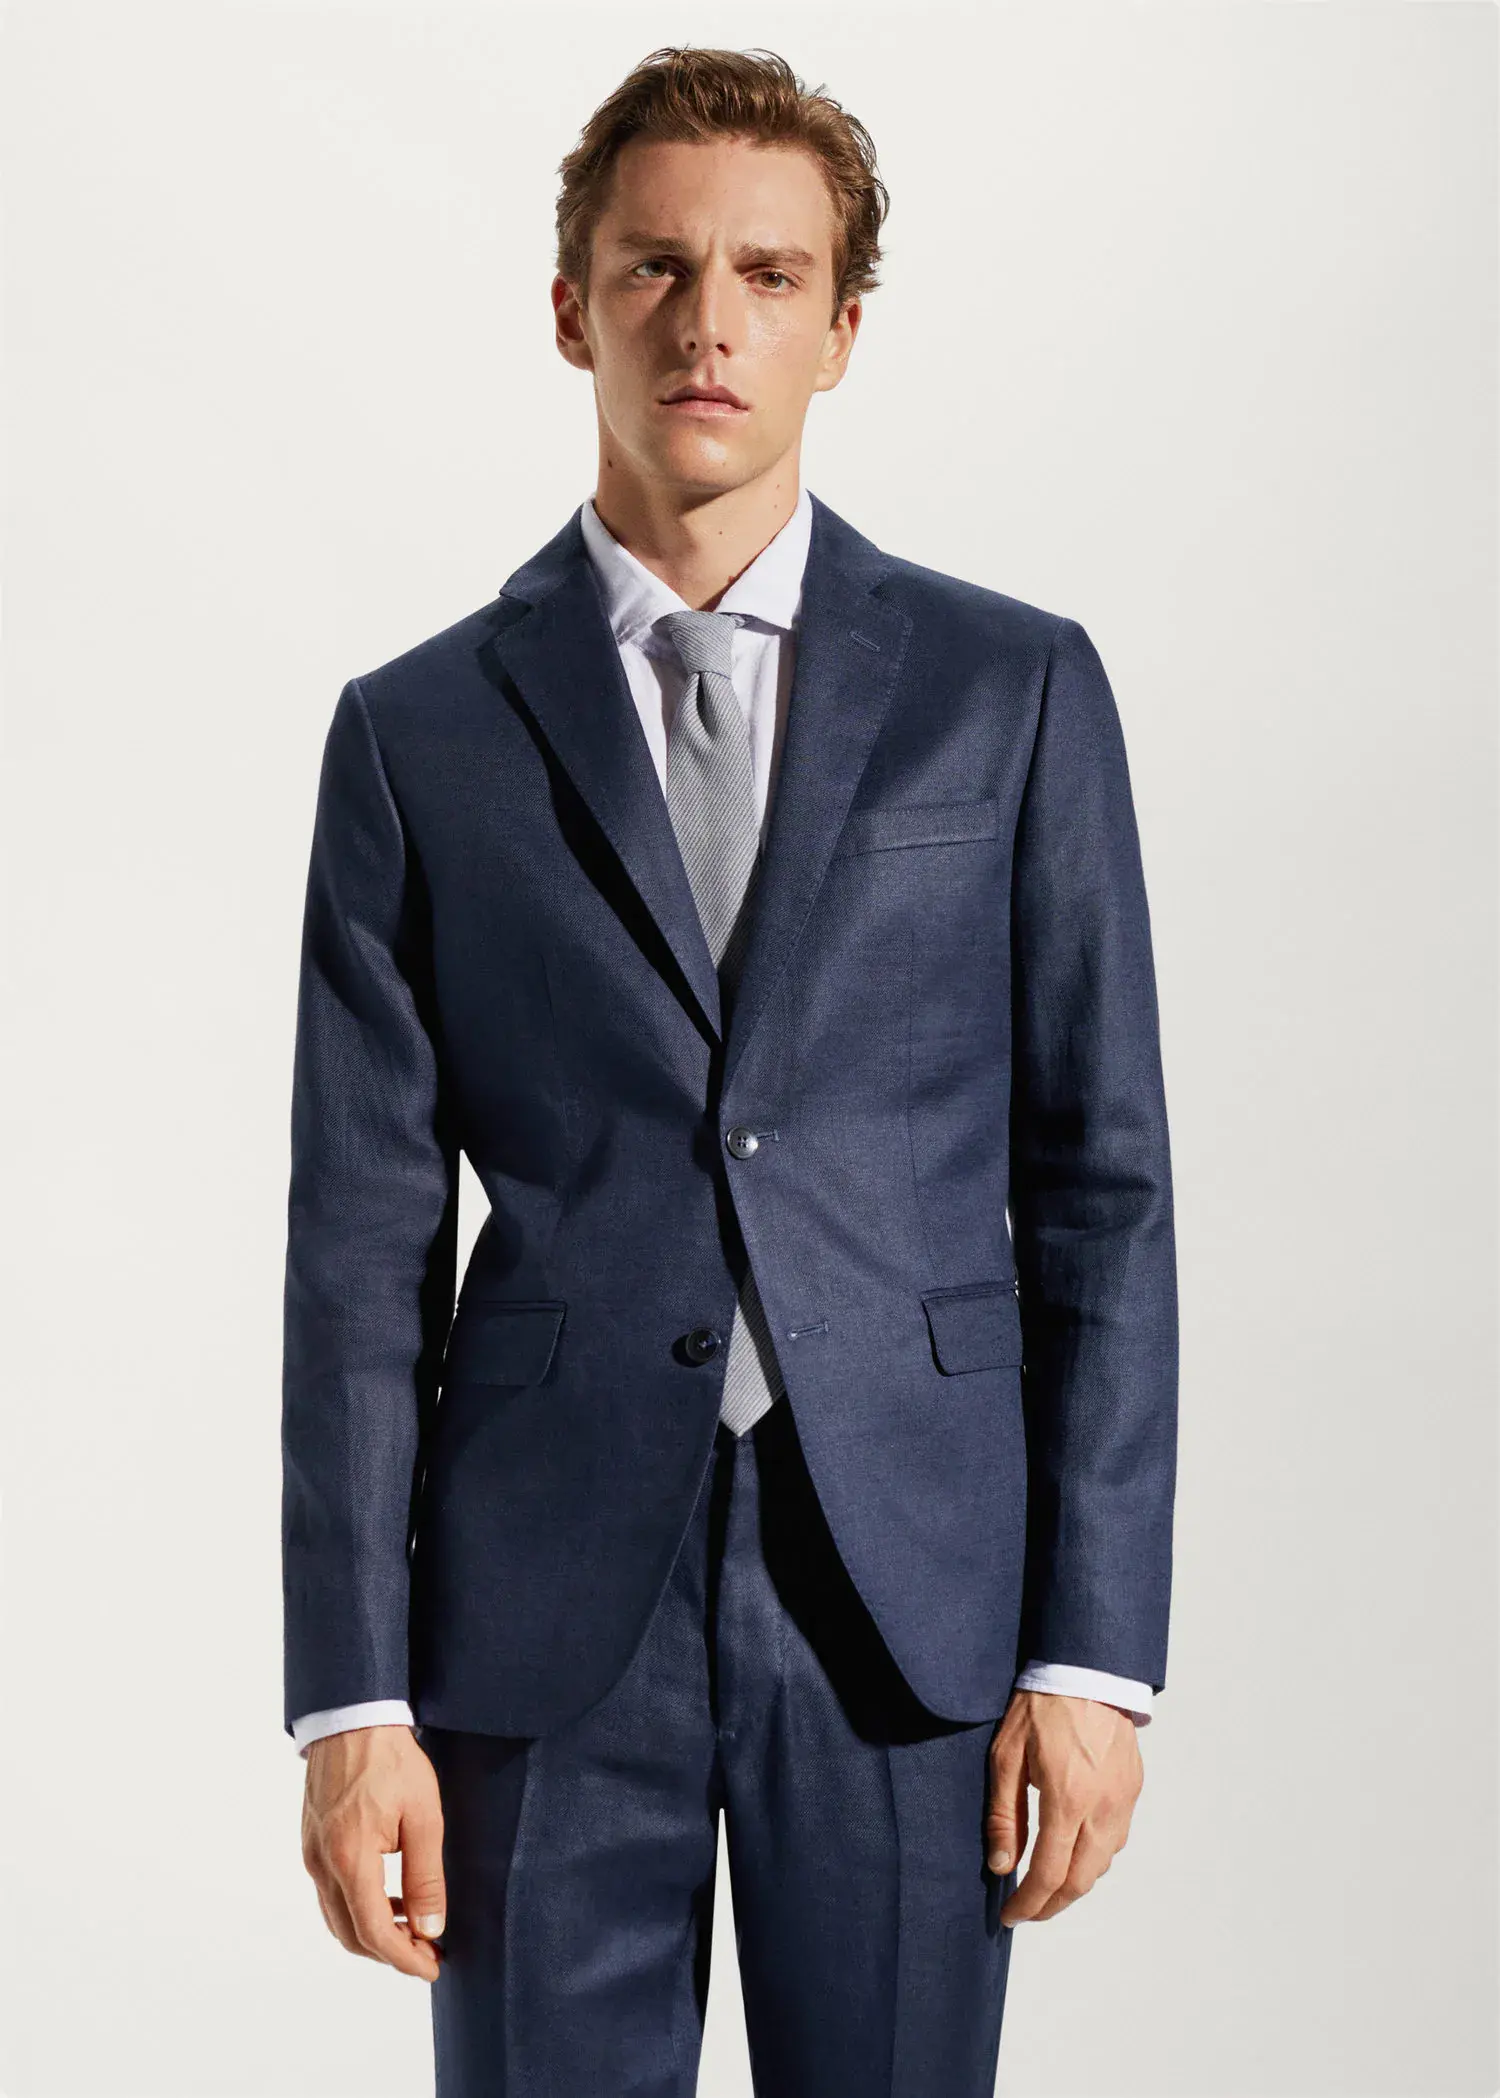 Mango Blazer suit 100% linen. a man wearing a suit and tie standing in front of a wall. 